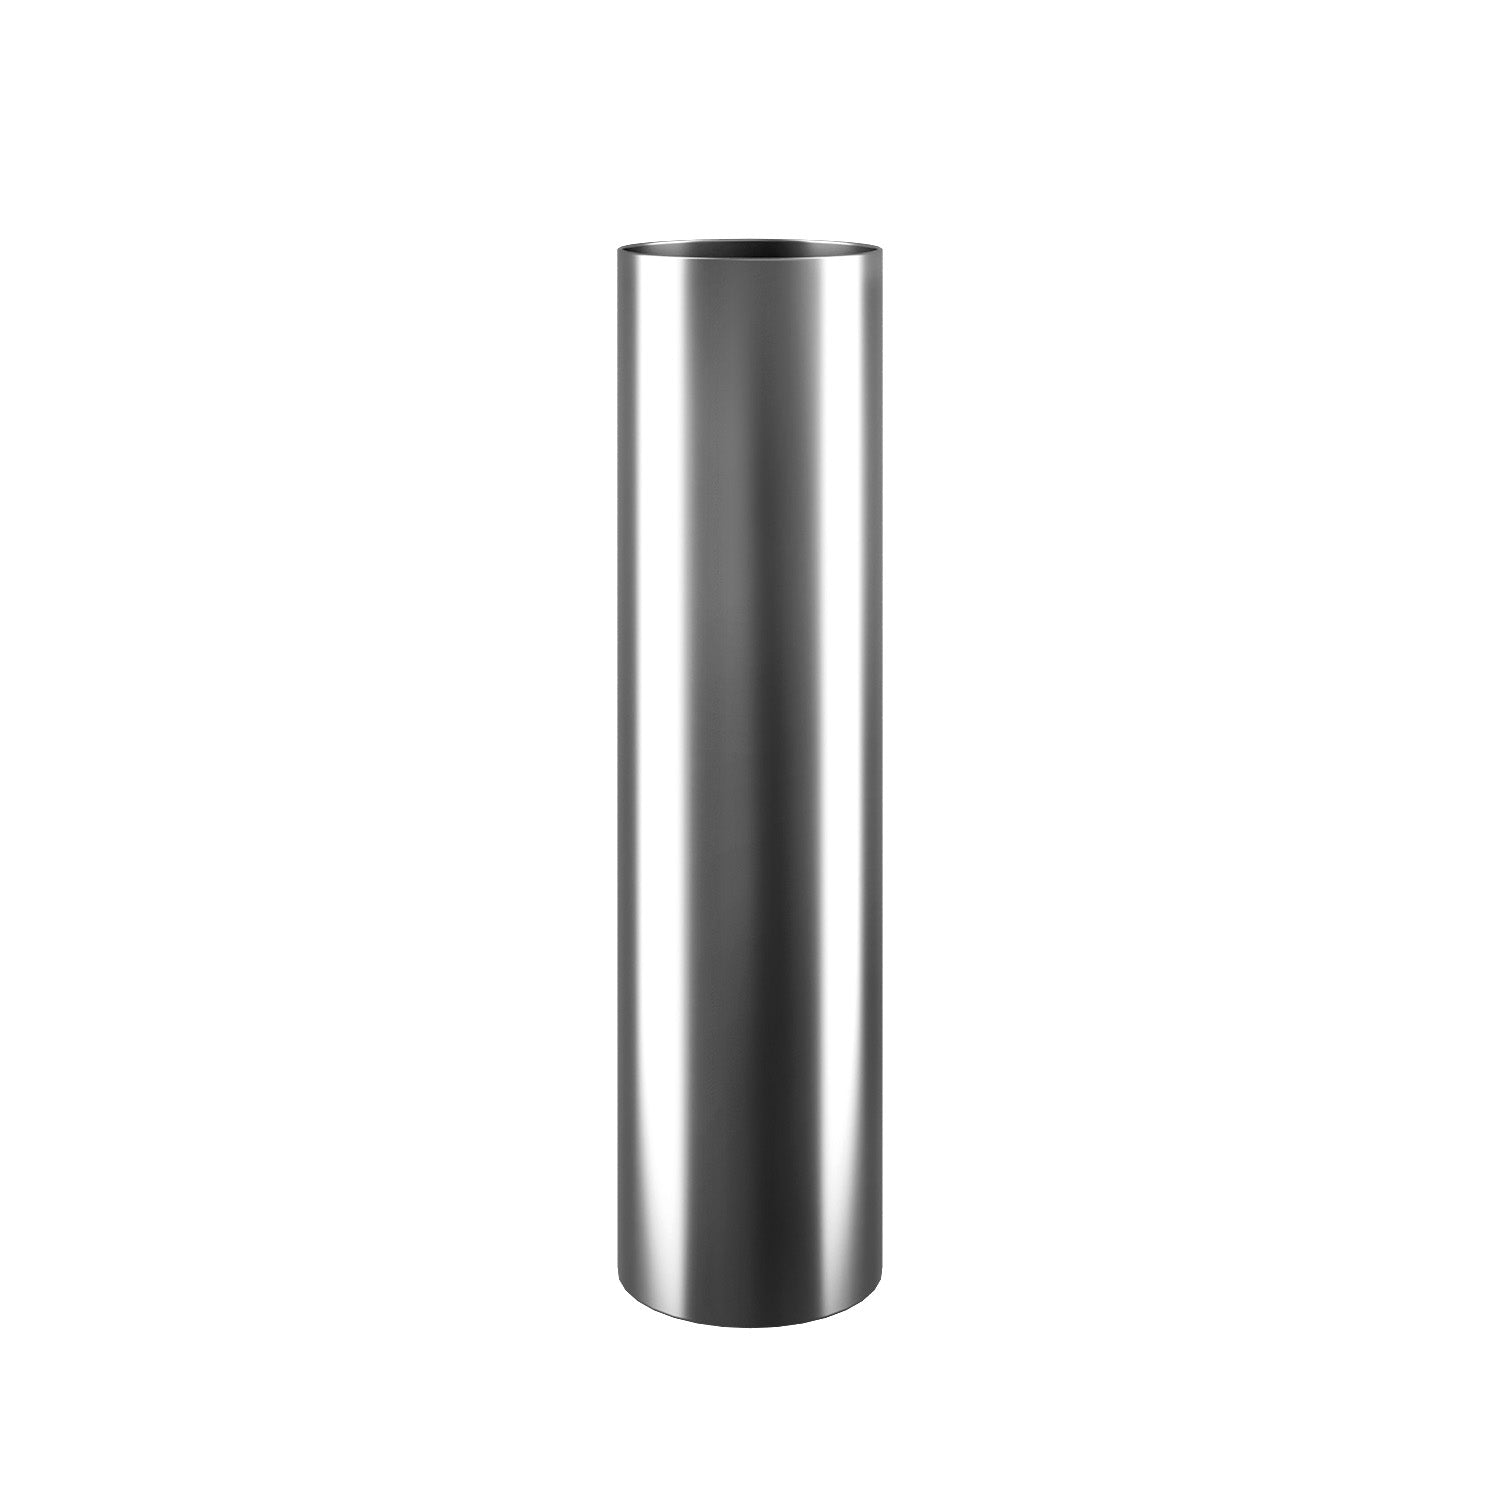 Beelonia pipe 500-1000mm, V2A stainless steel for smoking ovens